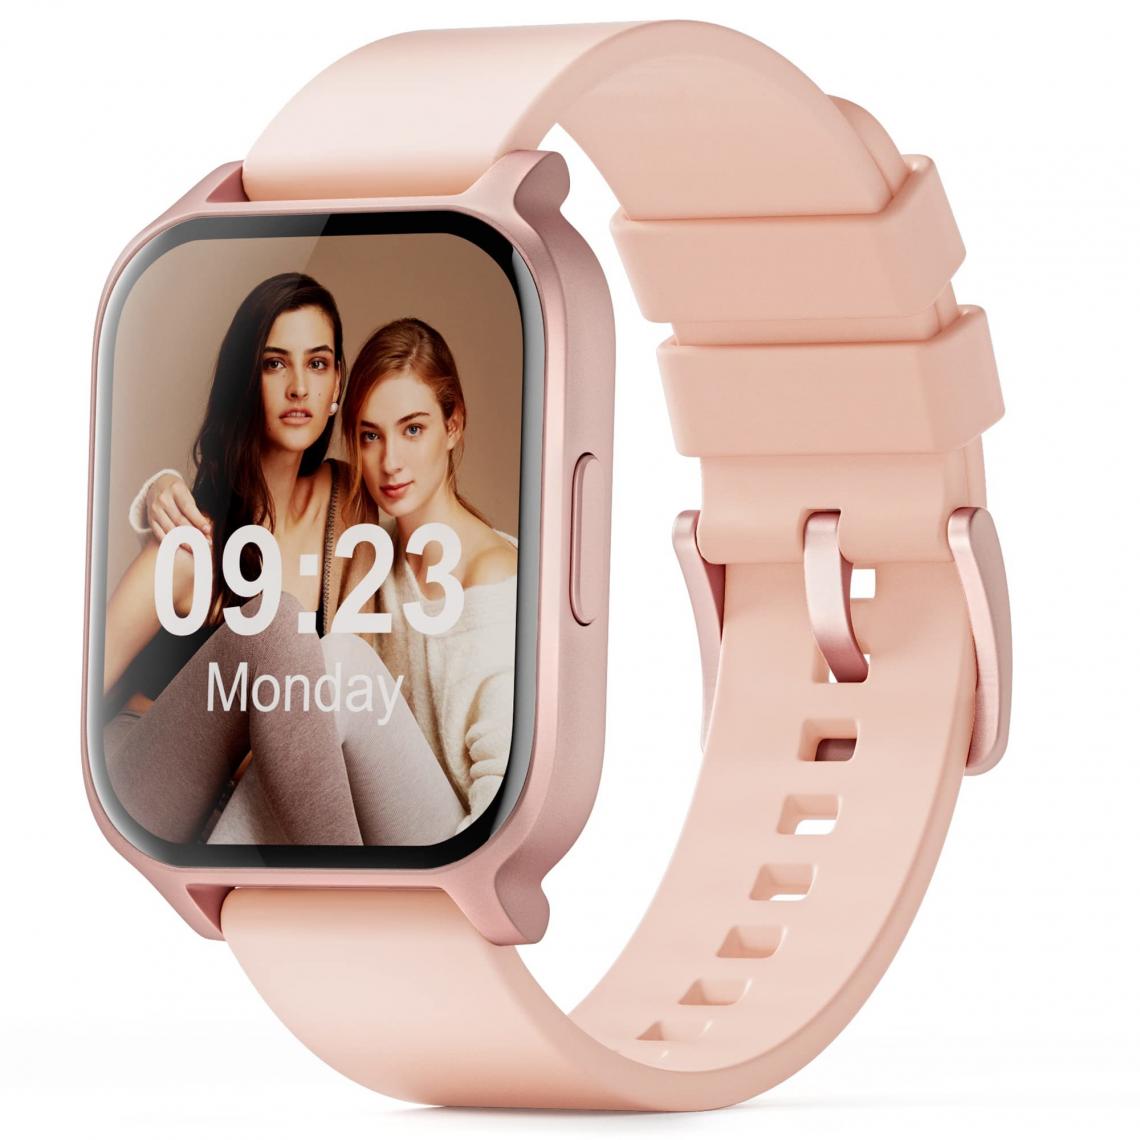 Chronotech Montres - Women's Connected Watch 1.69 inch Smartwatch for 24 Modes Sport Activity Tracker Personalized Dial Waterproof IP68 Shared GPS Fitness Smart Bracelet with Sleep Monitor(Pink) - Montre connectée